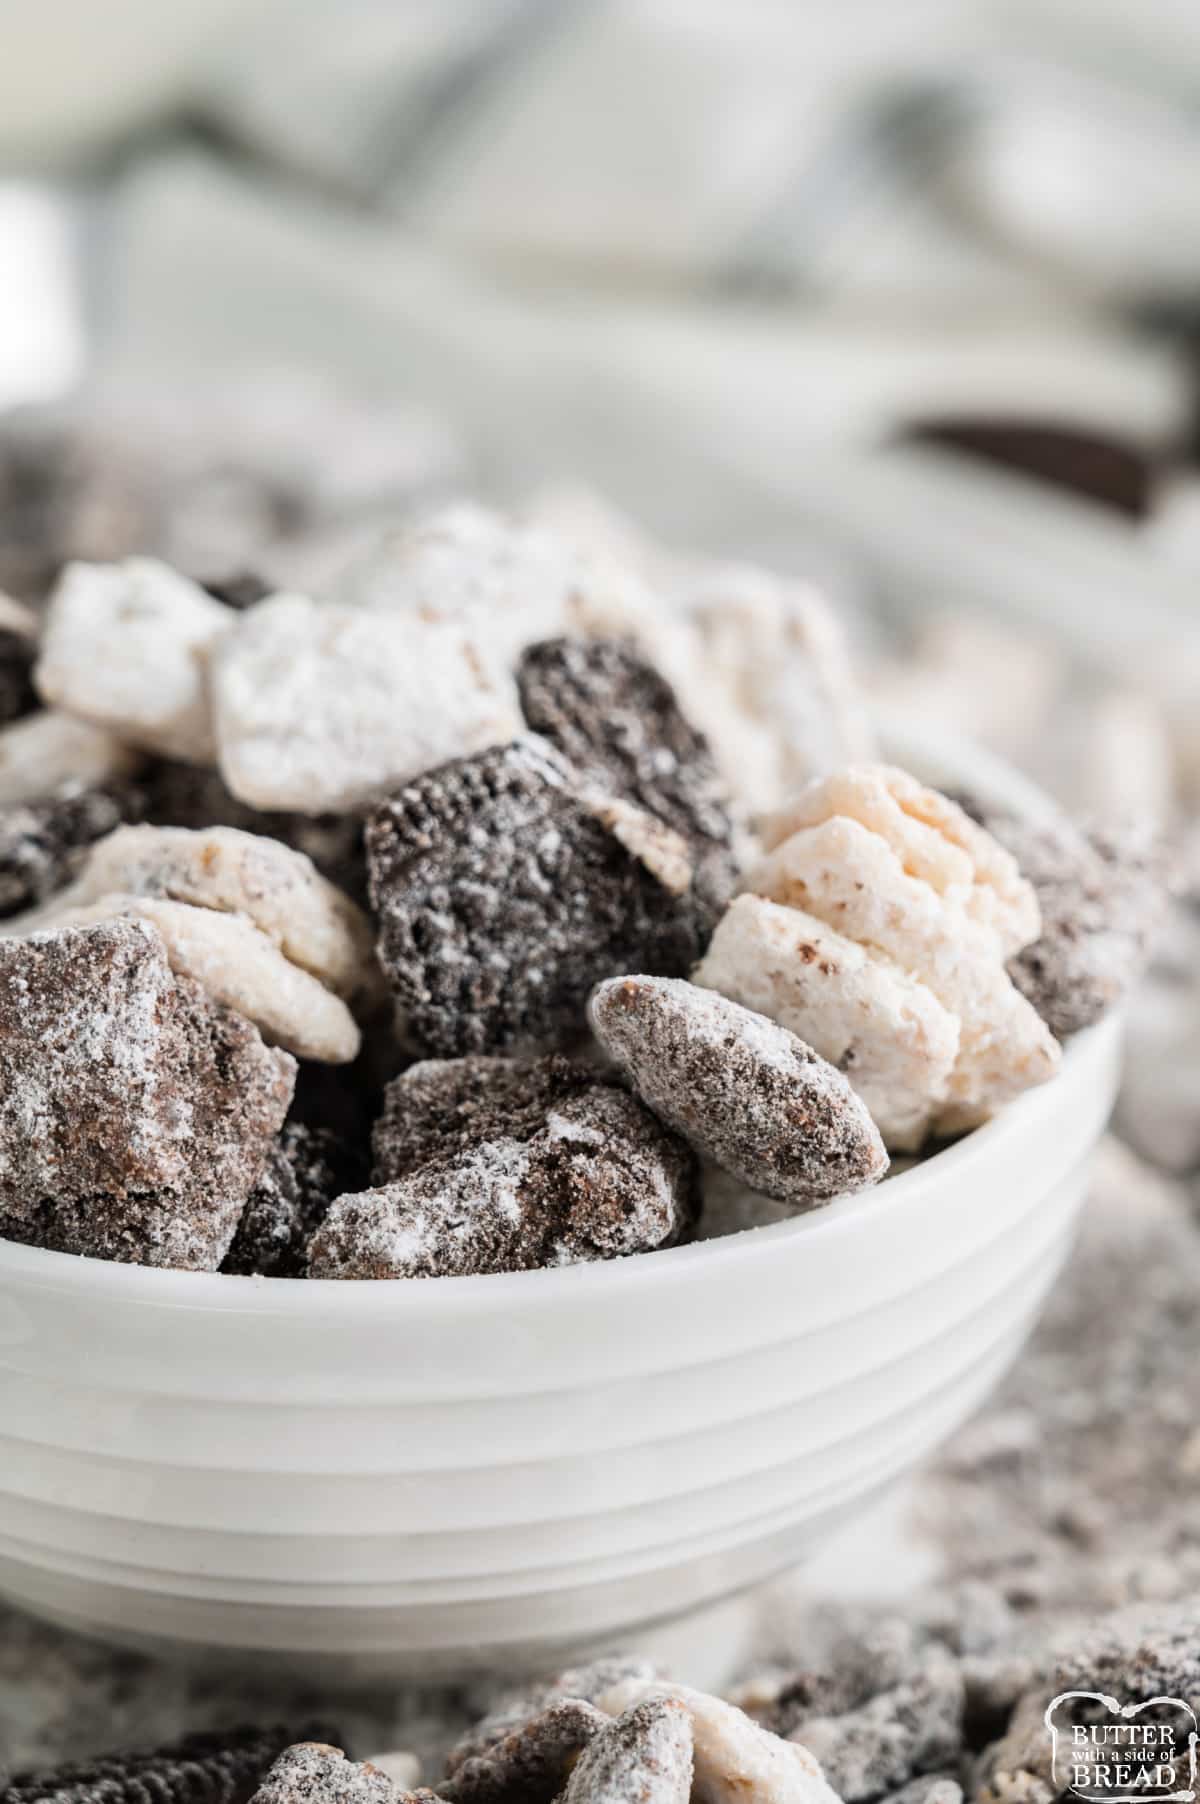 Cookies and Cream Muddy Buddies recipe made with Chex cereal, semi-sweet and white chocolate, powdered sugar and Oreo cookies. This delicious snack recipe is a huge crowd pleaser!